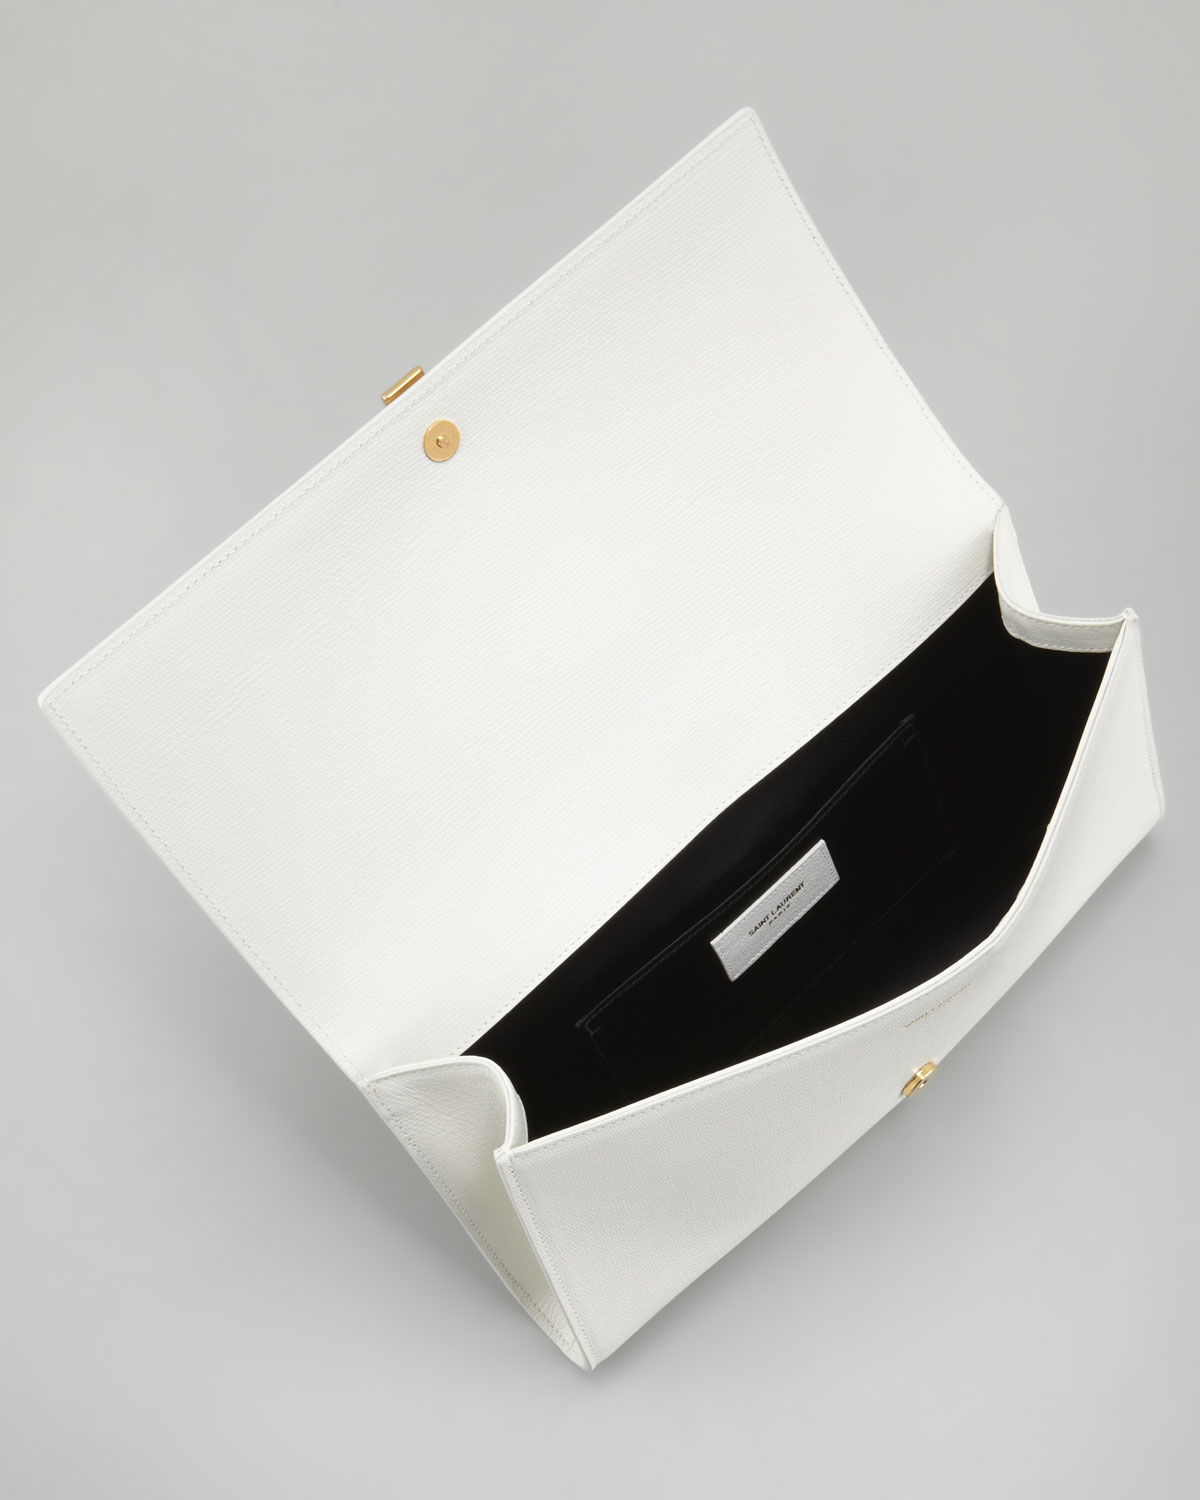 Saint laurent Cabas Chyc Clutch Bag in White (off white) | Lyst  